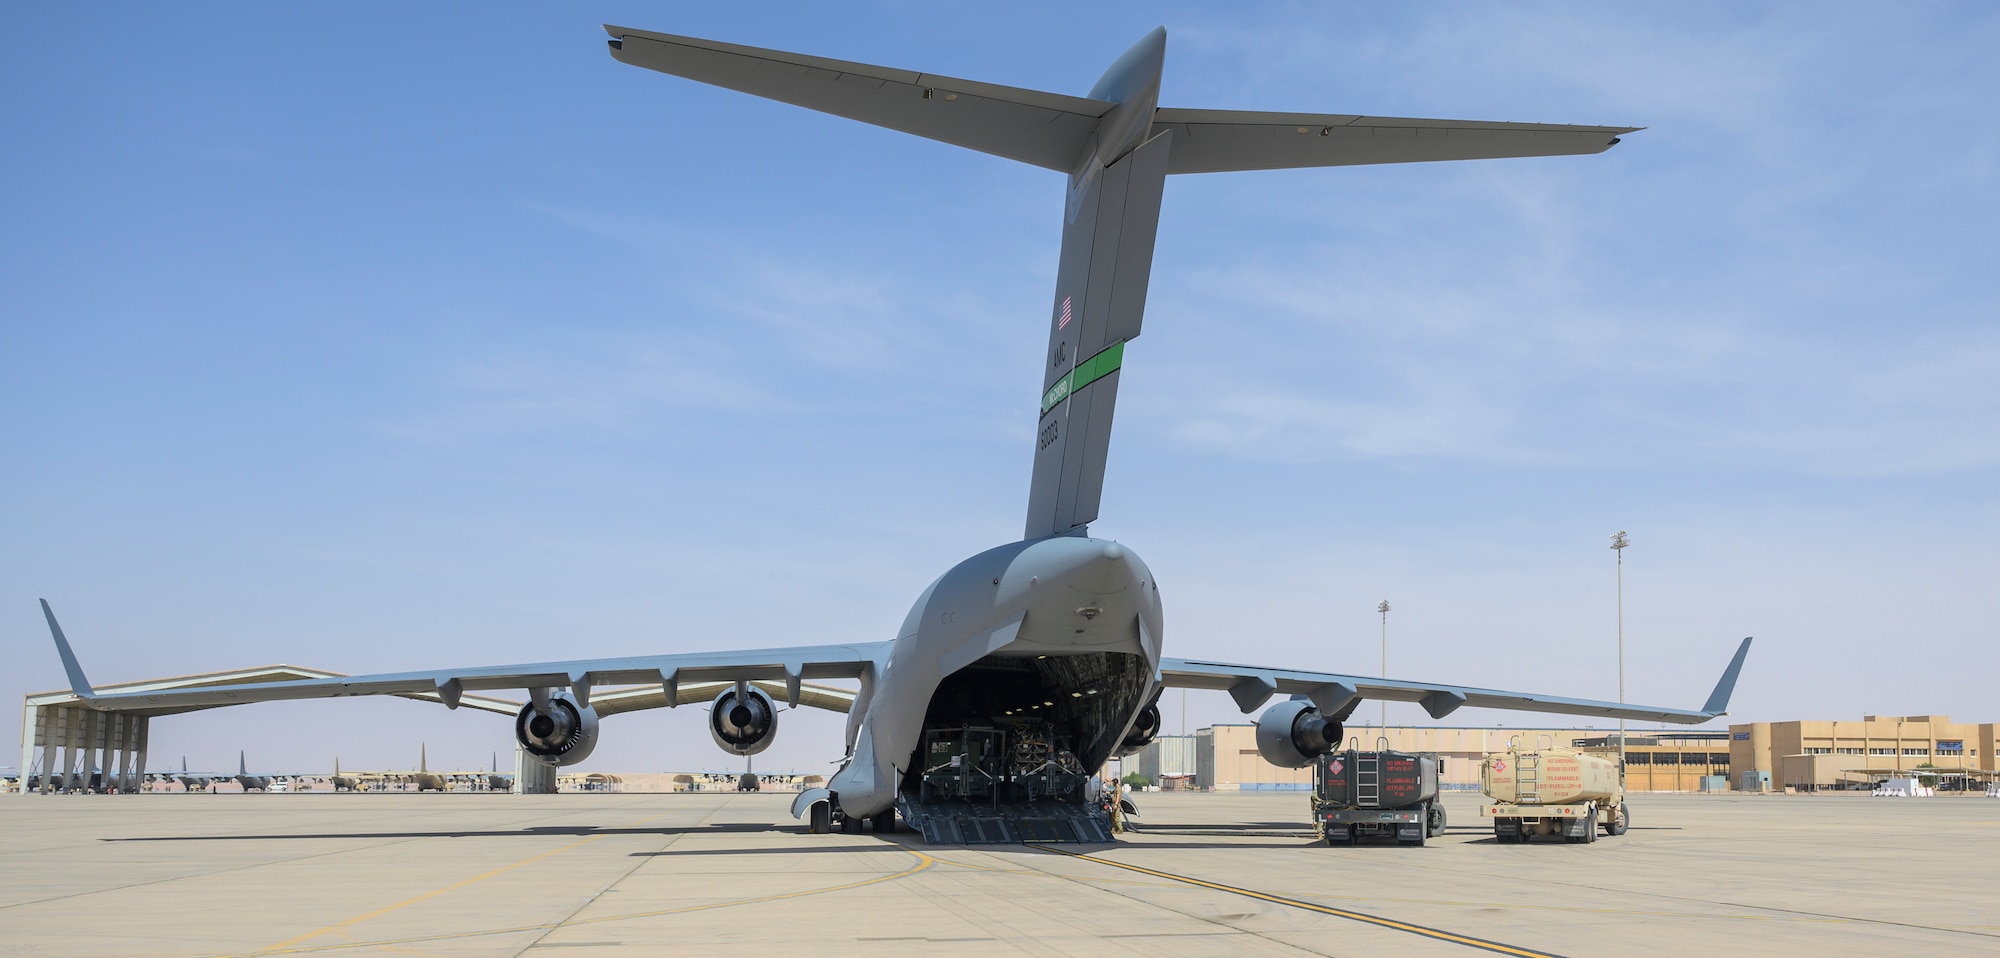 Personnel from the 378th Expeditionary Logistics Readiness Squadron refuel a U.S. Air Force C-17 carrying cargo from Marine Corps Air Station Beaufort, South Carolina, after it landed at Prince Sultan Air Base, Kingdom of Saudi Arabia, May 5, 2021. Personnel, aircraft, and supplies from Marine All Weather Fighter Attack Squadron 224, Marine Aircraft Group 31, deployed as part of a dynamic force employment to PSAB to enhance U.S. Central Command’s ability to deter aggression and promote security and stability within the USCENTCOM area of responsibility. (U.S. Air Force photo by Senior Airman Samuel Earick)